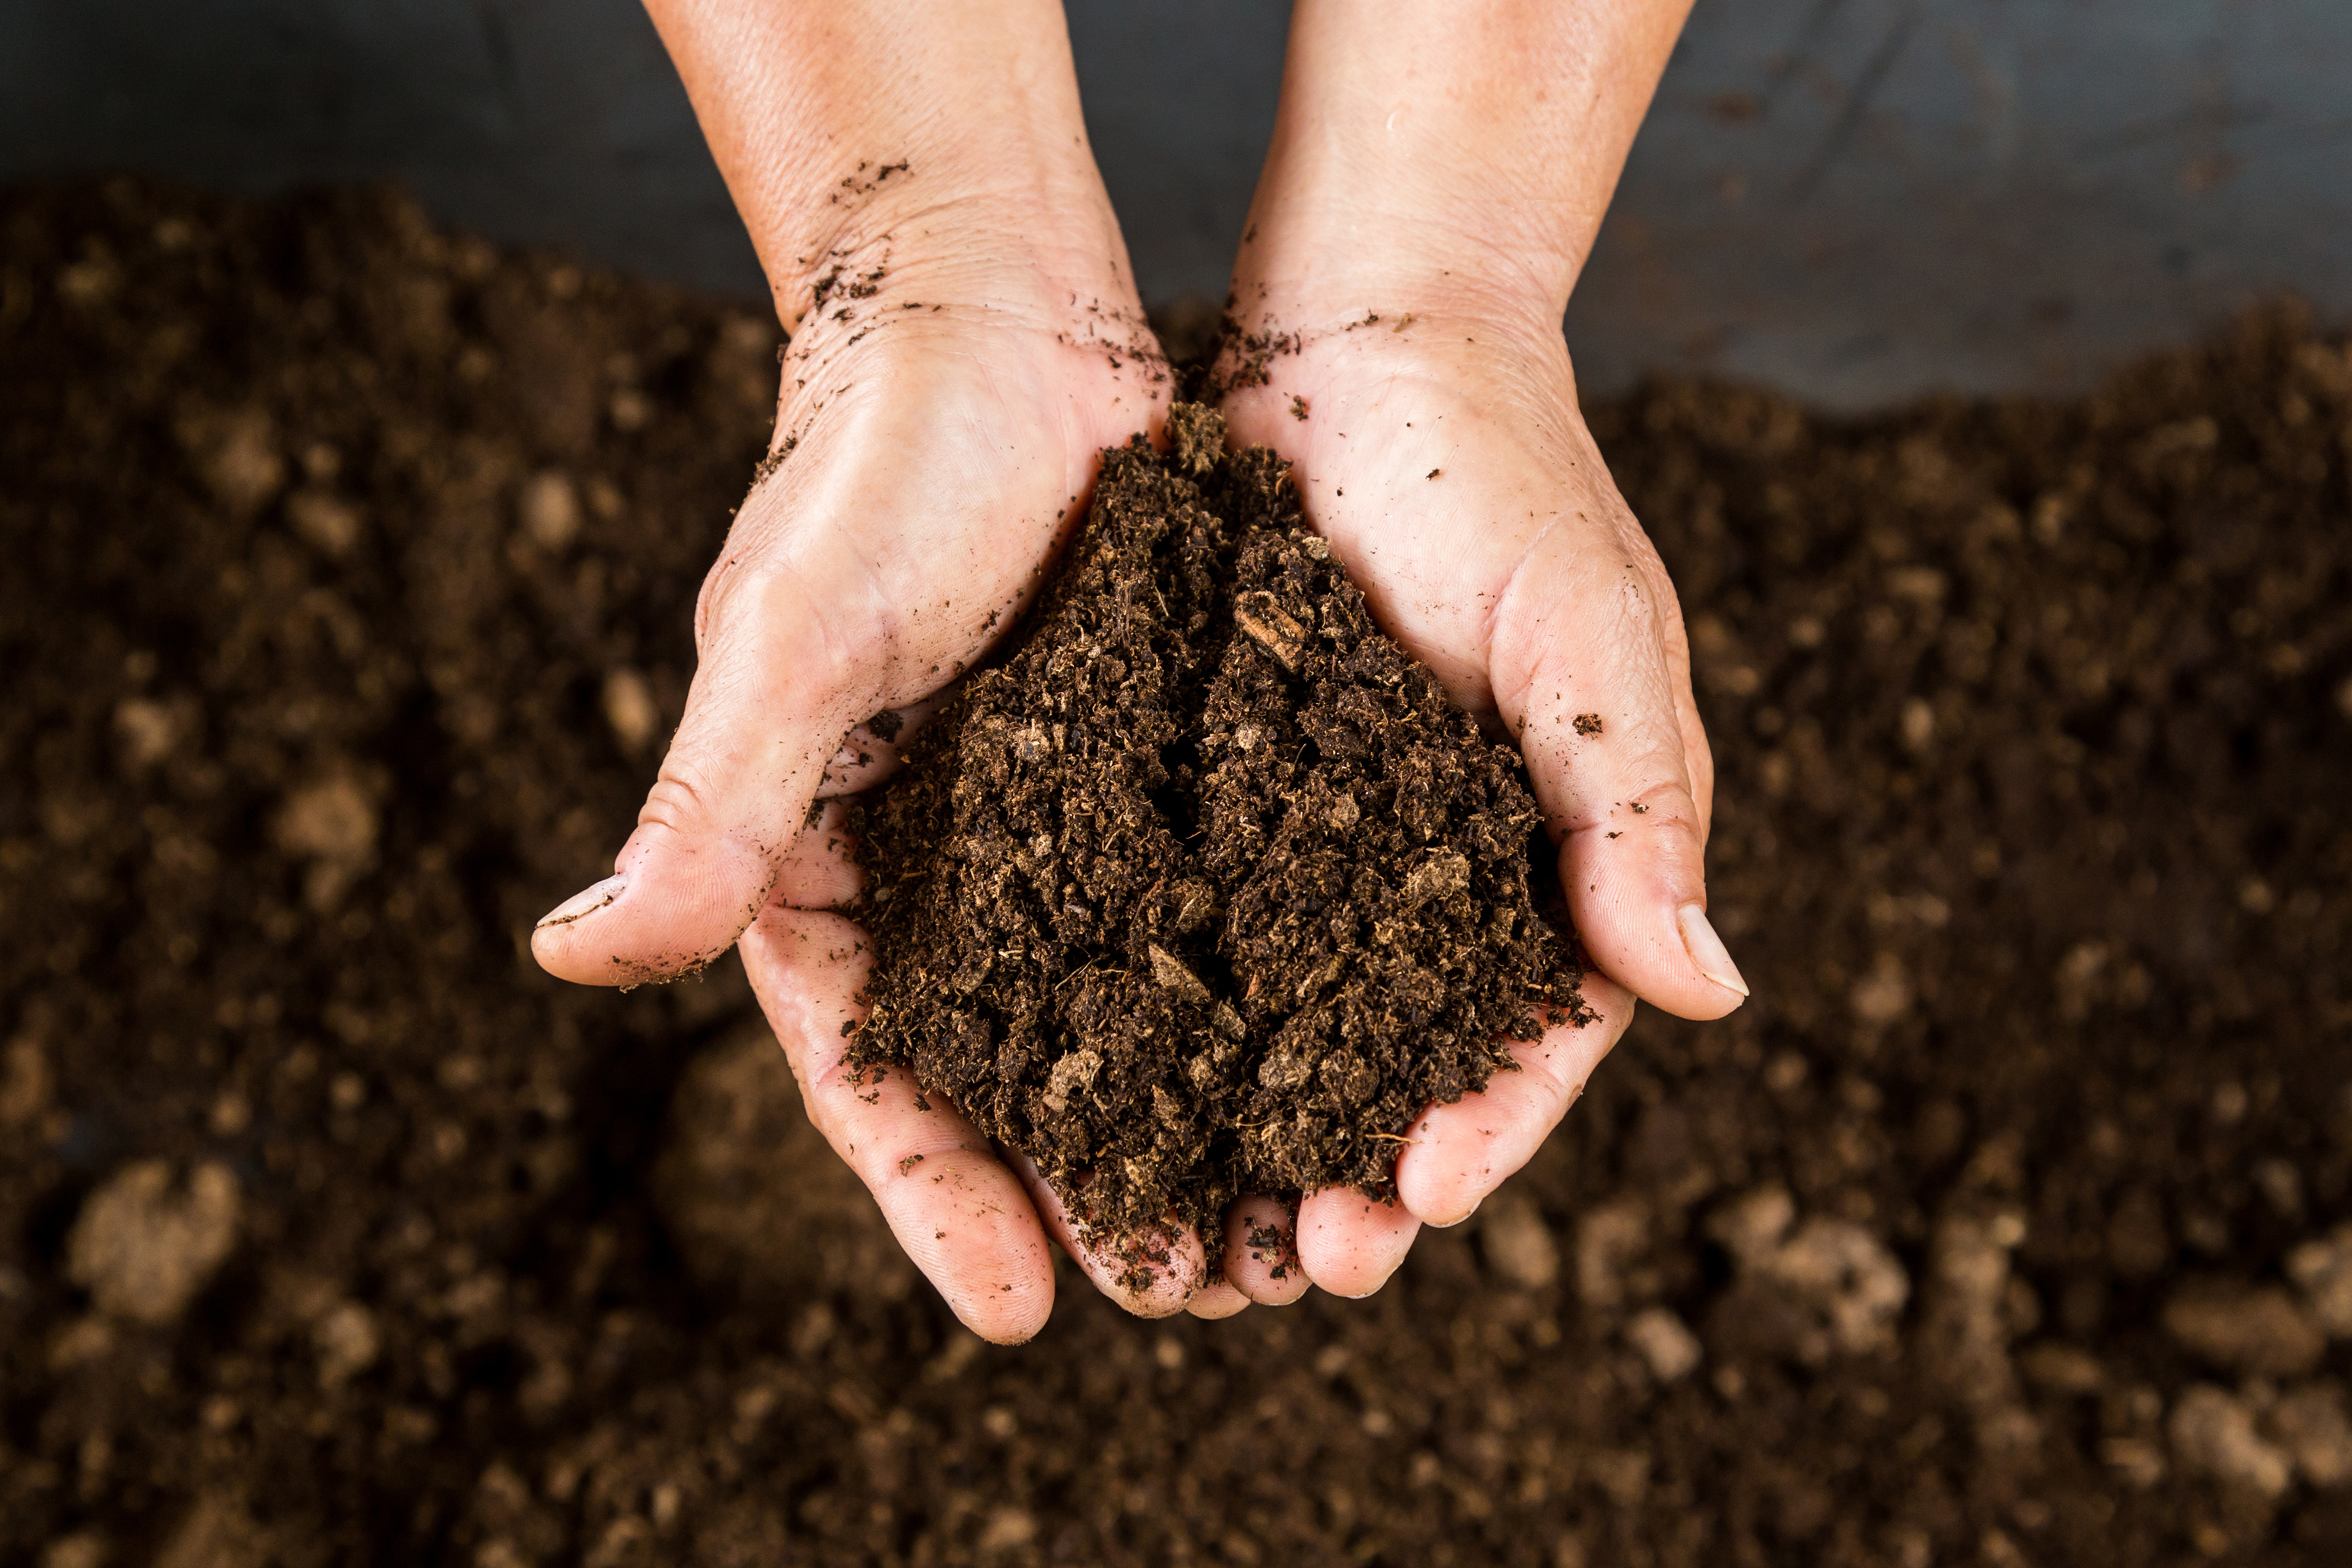 Be careful what you put in your compost (Thinkstock/PA)